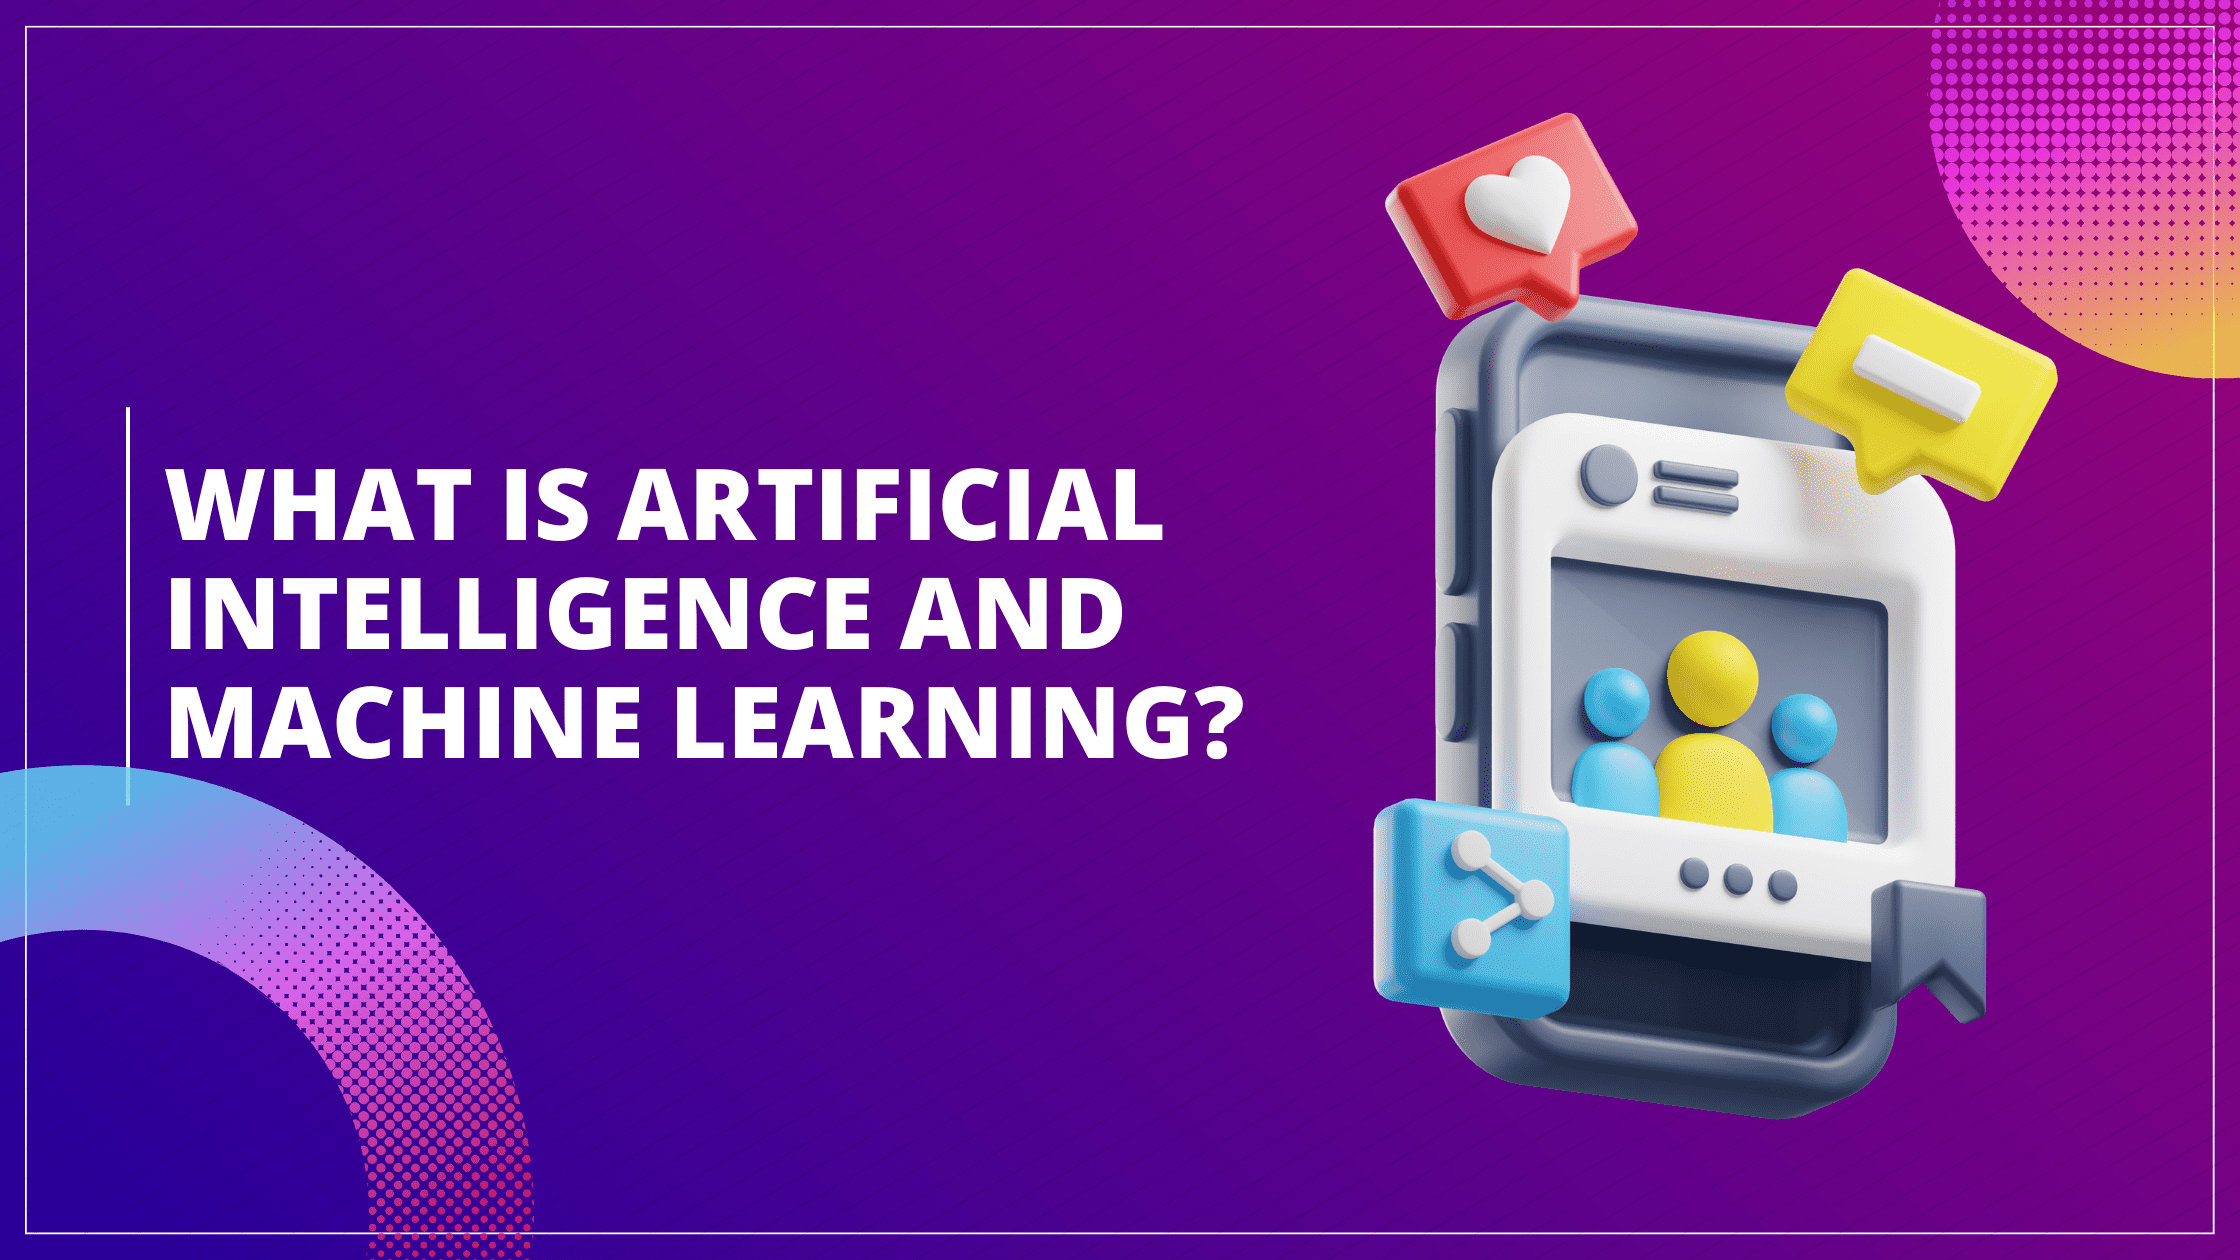 What is Artificial Intelligence And Machine Learning